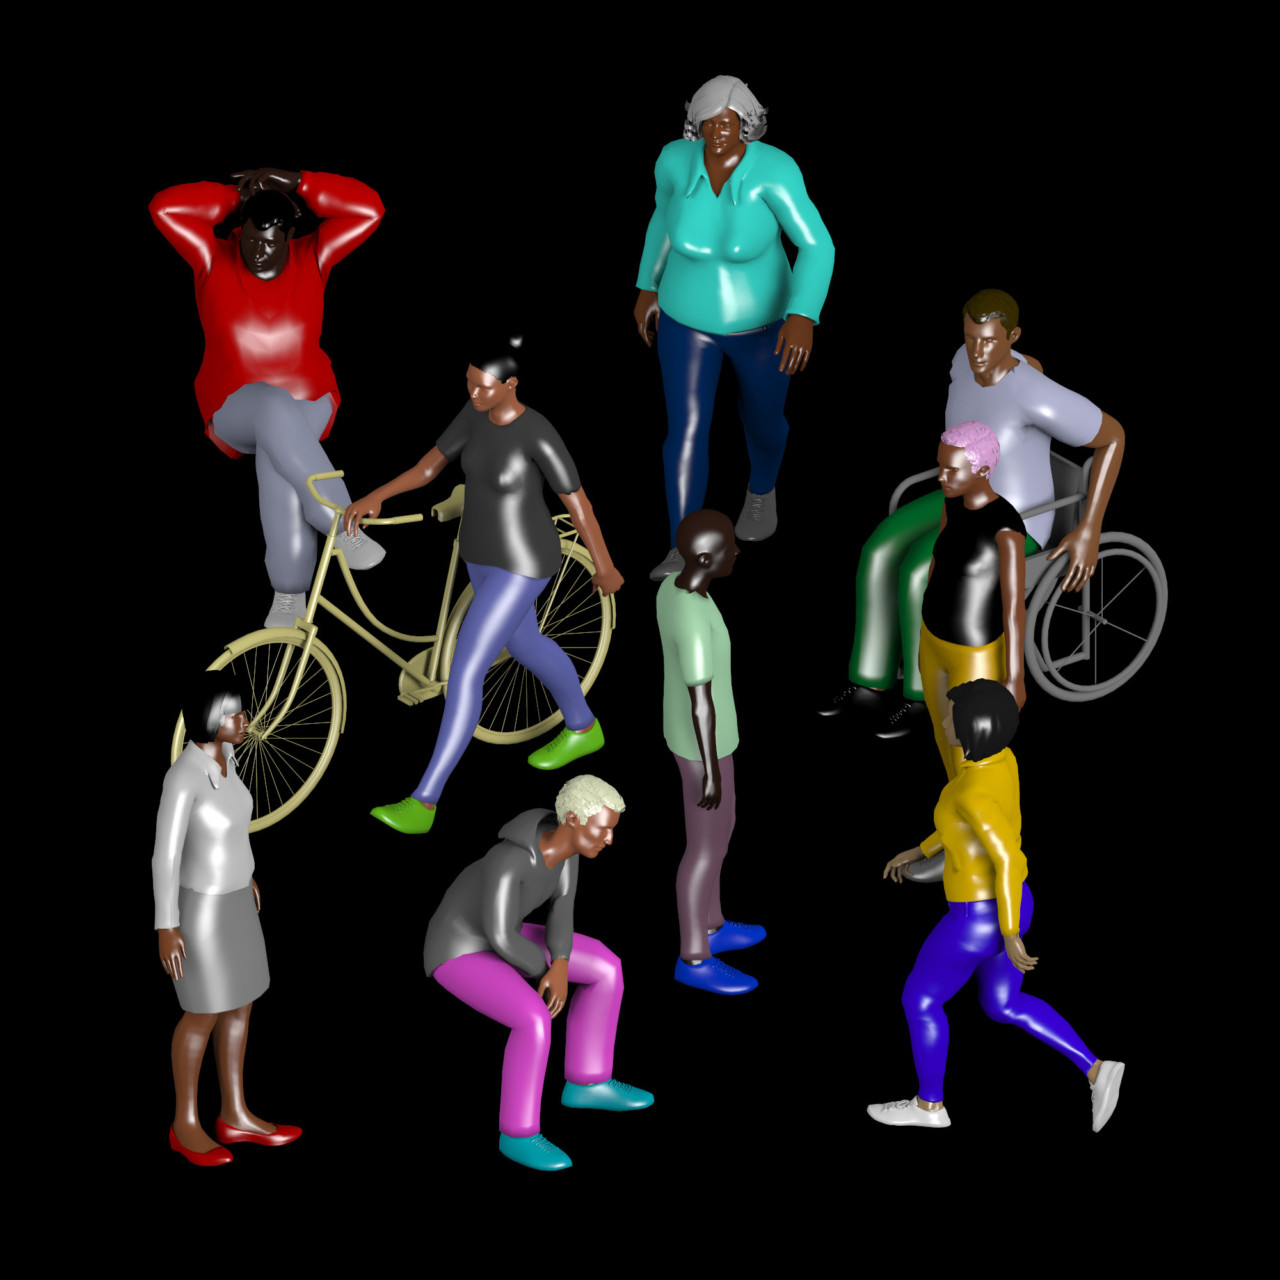 Rendering of people with different mobility issues for ACADIA 2020